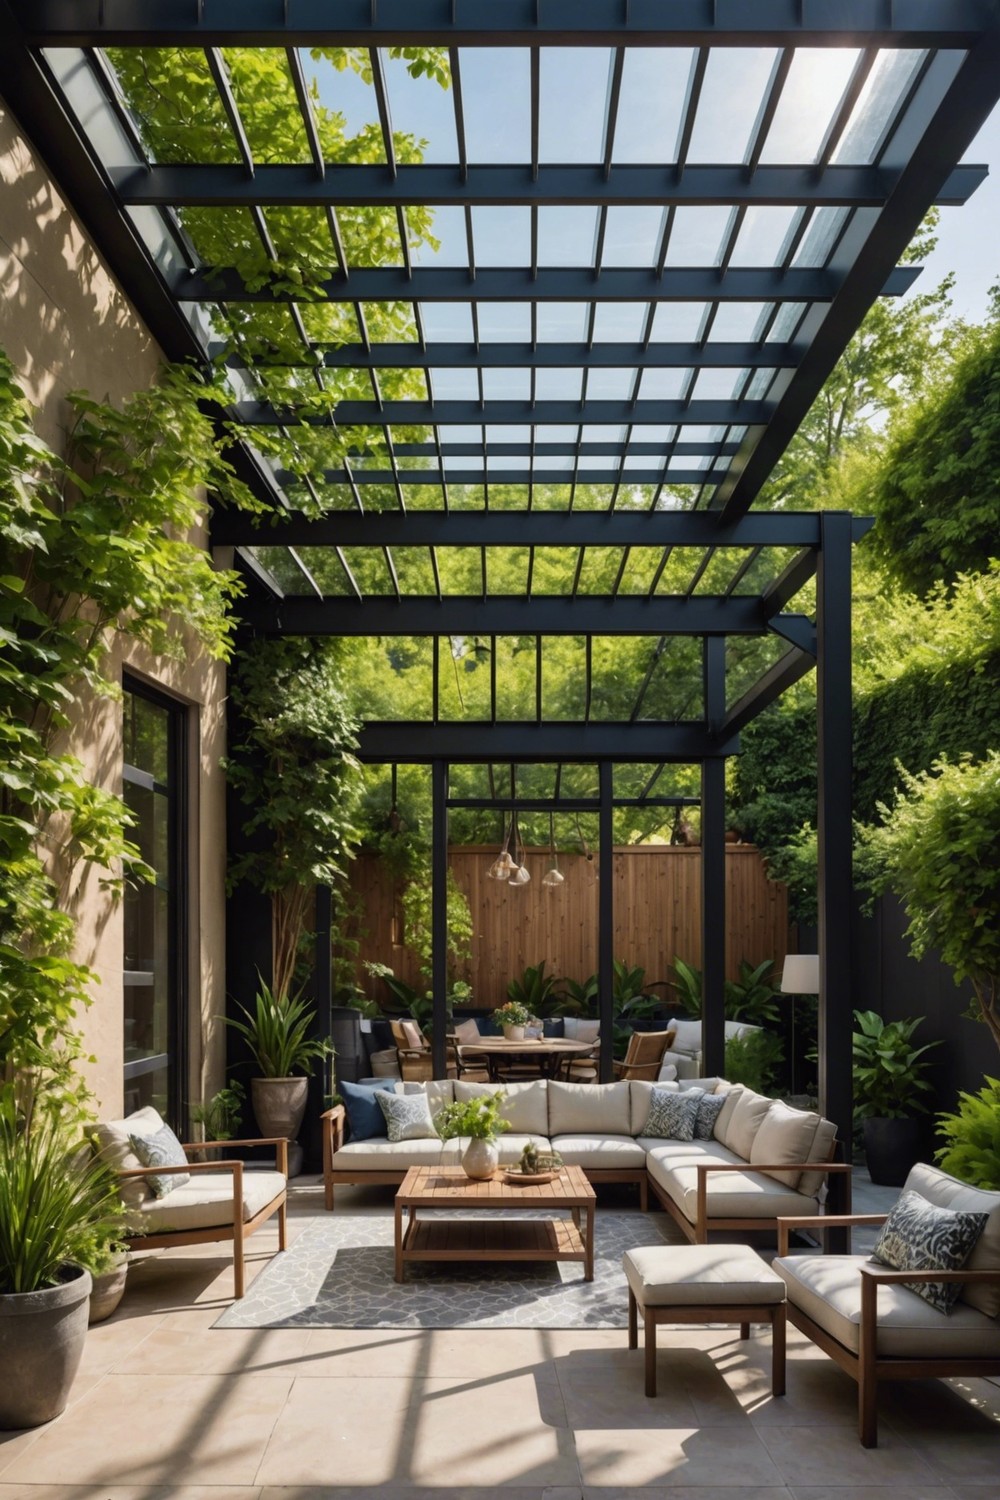 Pergola with Steel Beams and Polycarbonate Roof